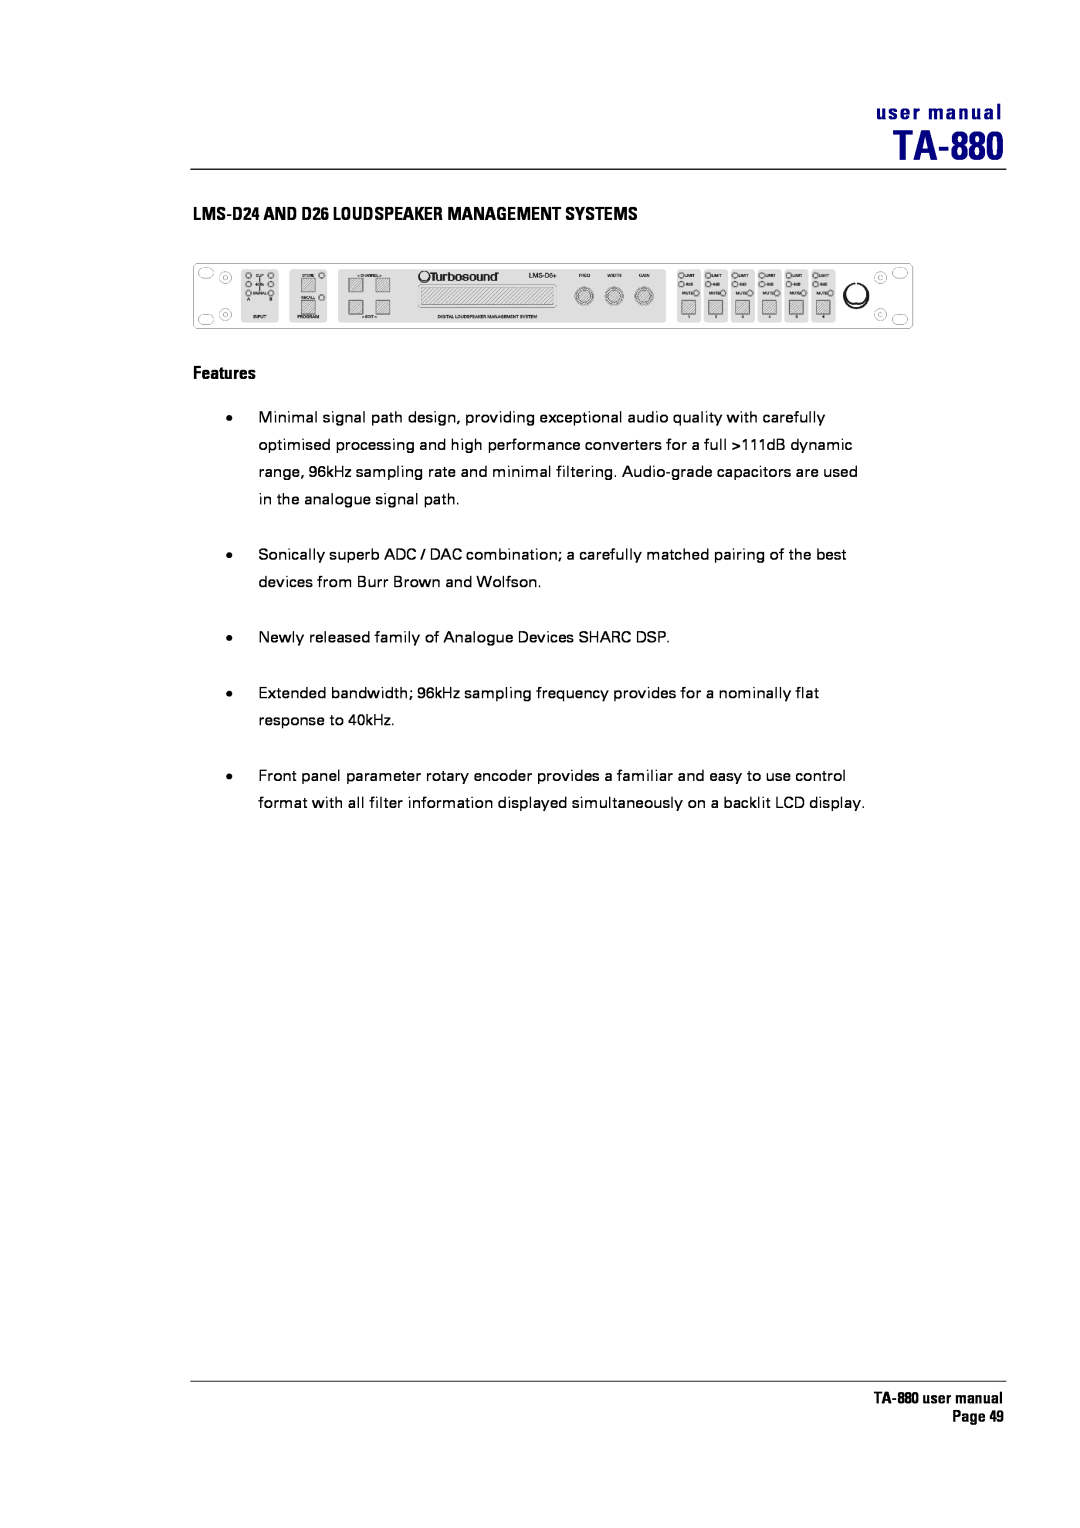 Turbosound TA-880 user manual LMS-D24AND D26 LOUDSPEAKER MANAGEMENT SYSTEMS, Features 